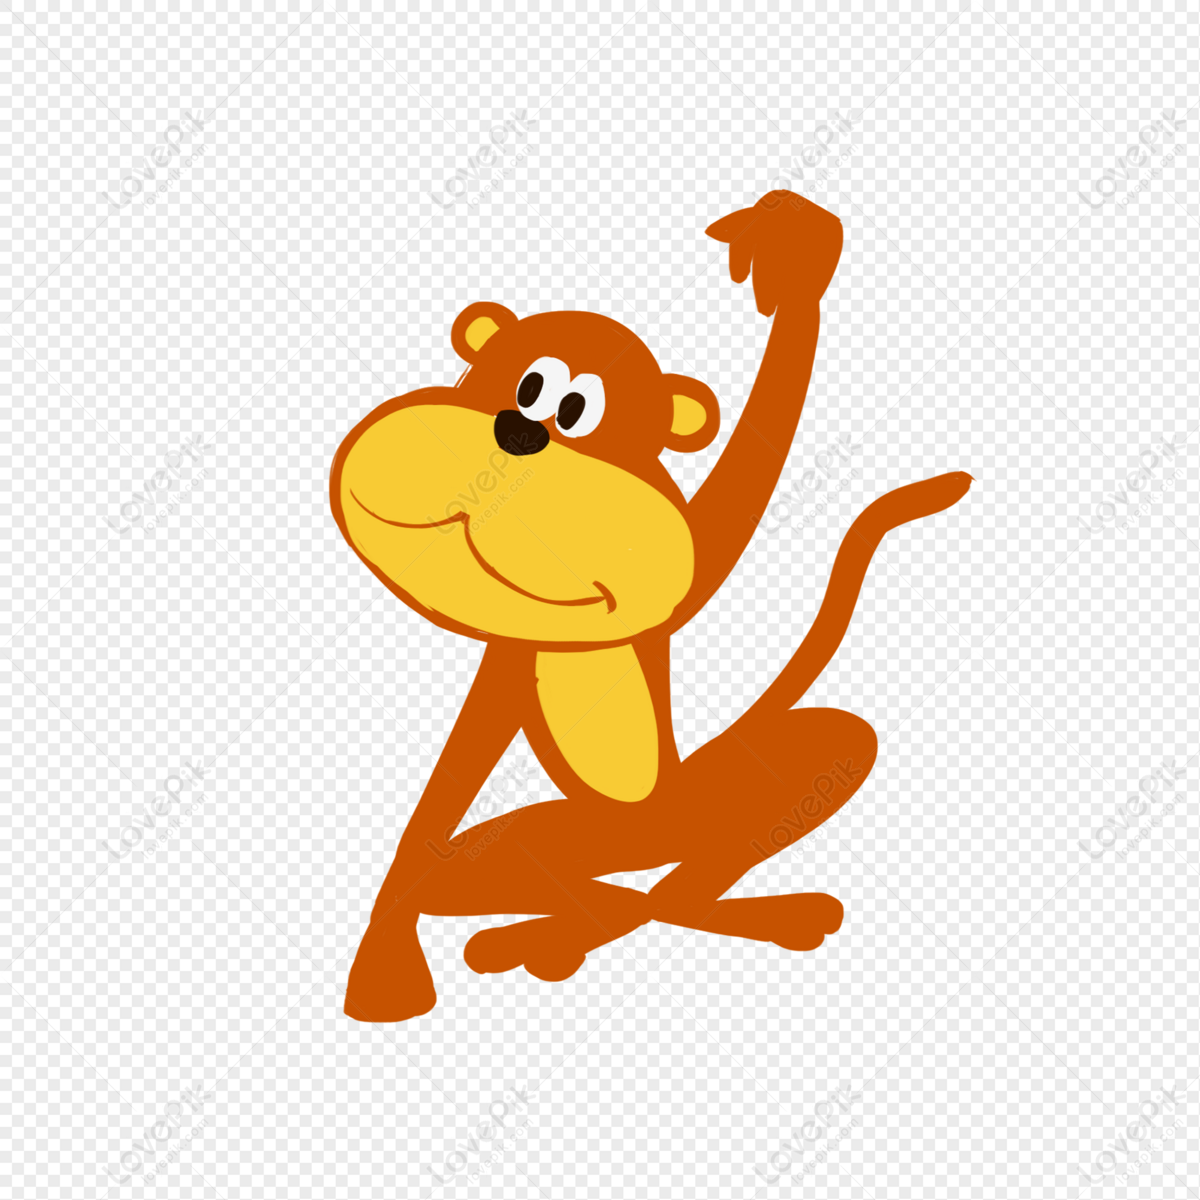 Monkey PNG Image Free Download And Clipart Image For Free Download -  Lovepik | 401451721